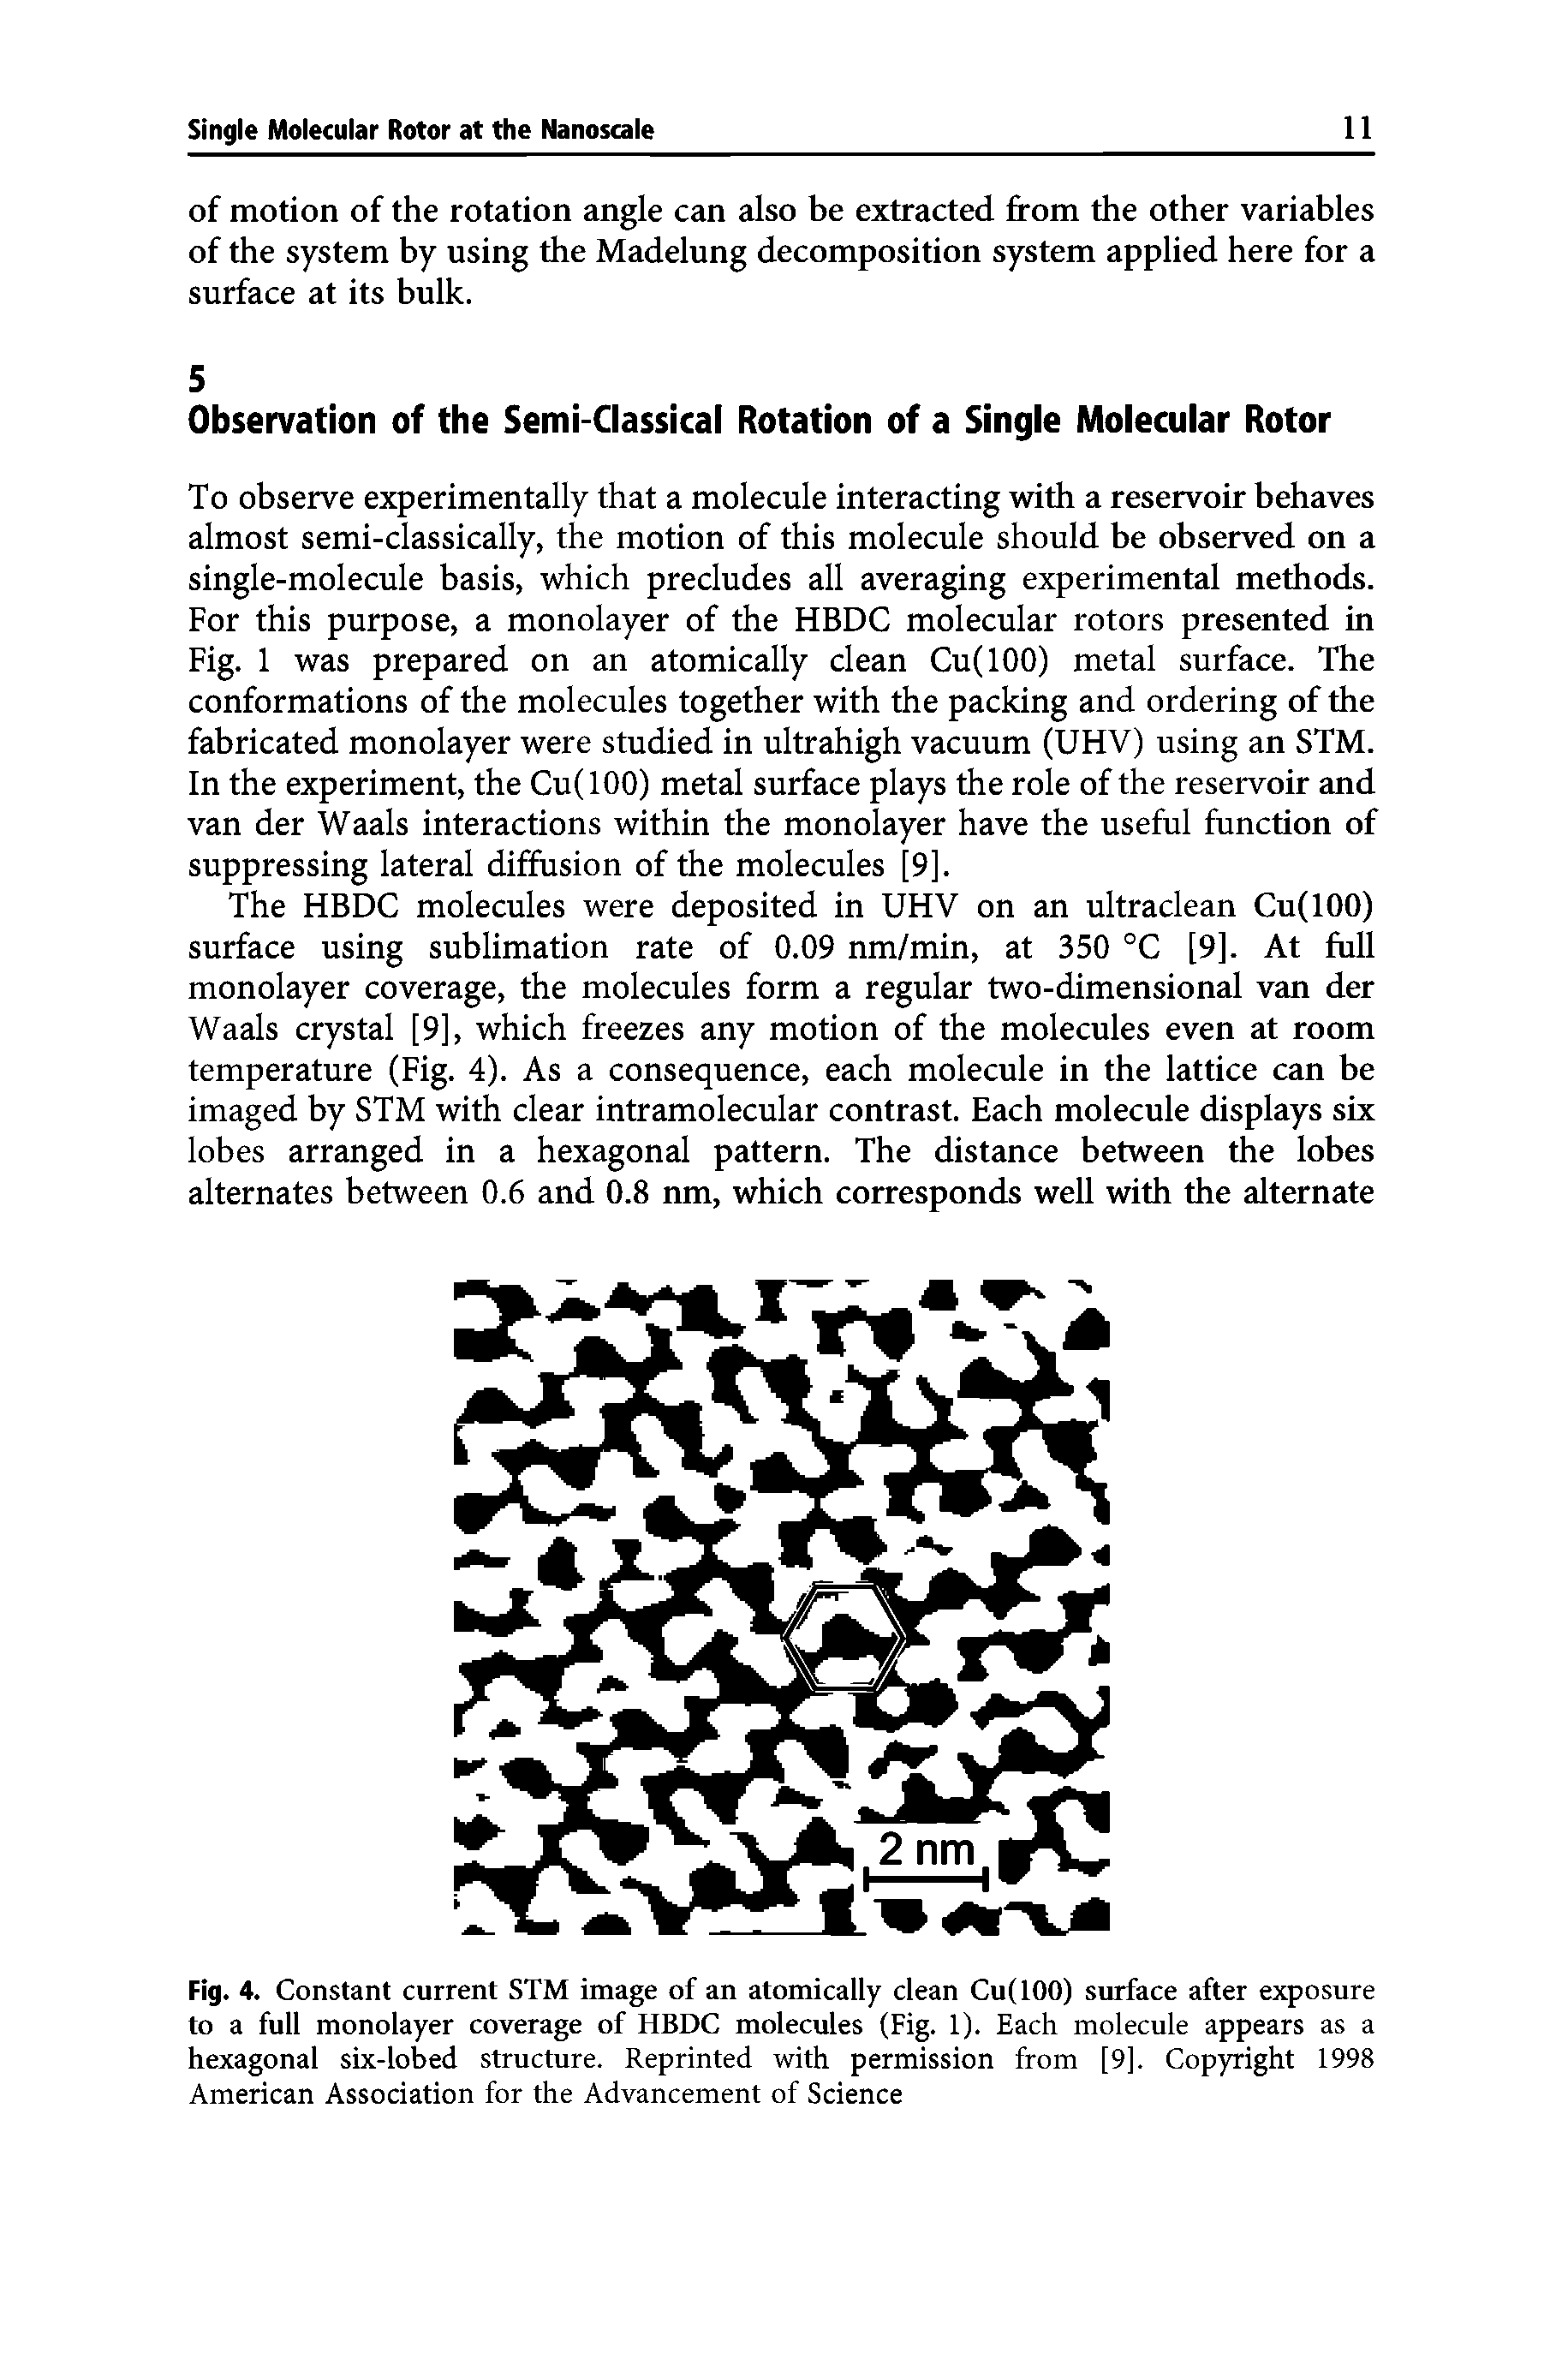 Fig. 4. Constant current STM image of an atomically clean Cu(100) surface after exposure to a full monolayer coverage of HBDC molecules (Fig. 1). Each molecule appears as a hexagonal six-lobed structure. Reprinted with permission from [9]. Copyright 1998 American Association for the Advancement of Science...